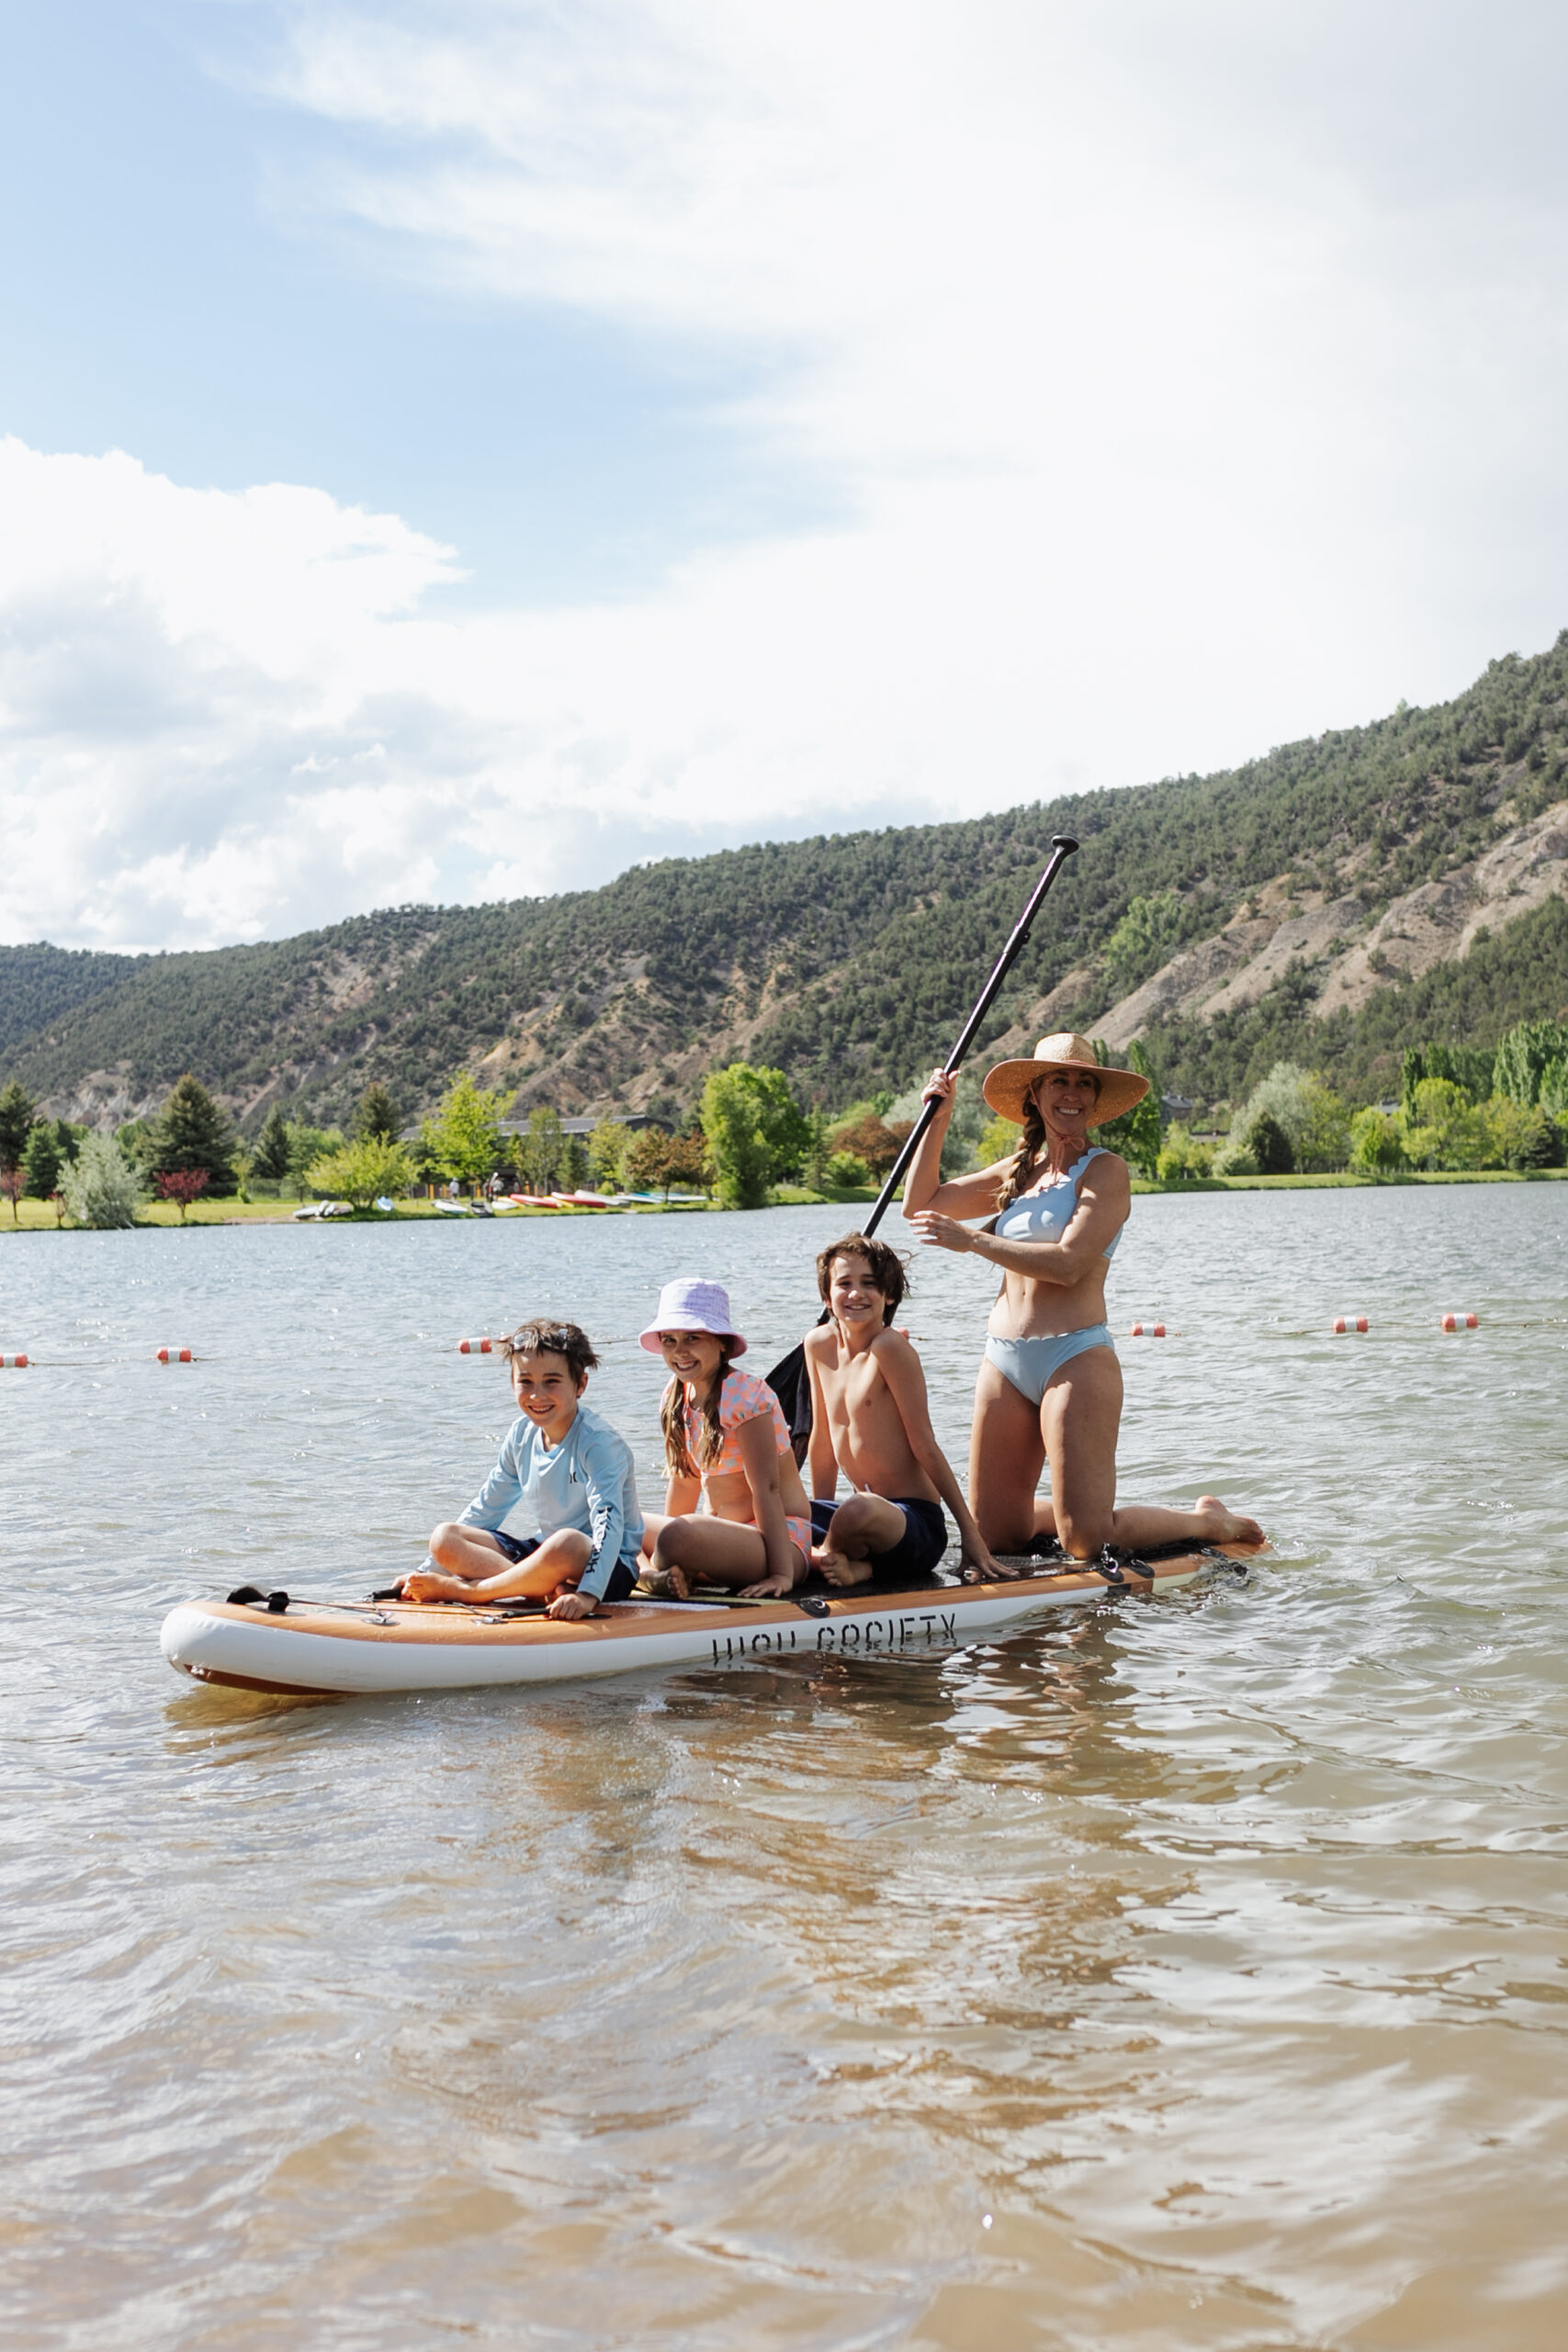 our family loves SUP! Explore some of the many great places in and around Aspen to Stand up Paddleboard in the summer. #visitaspen #SUP #mountainlife